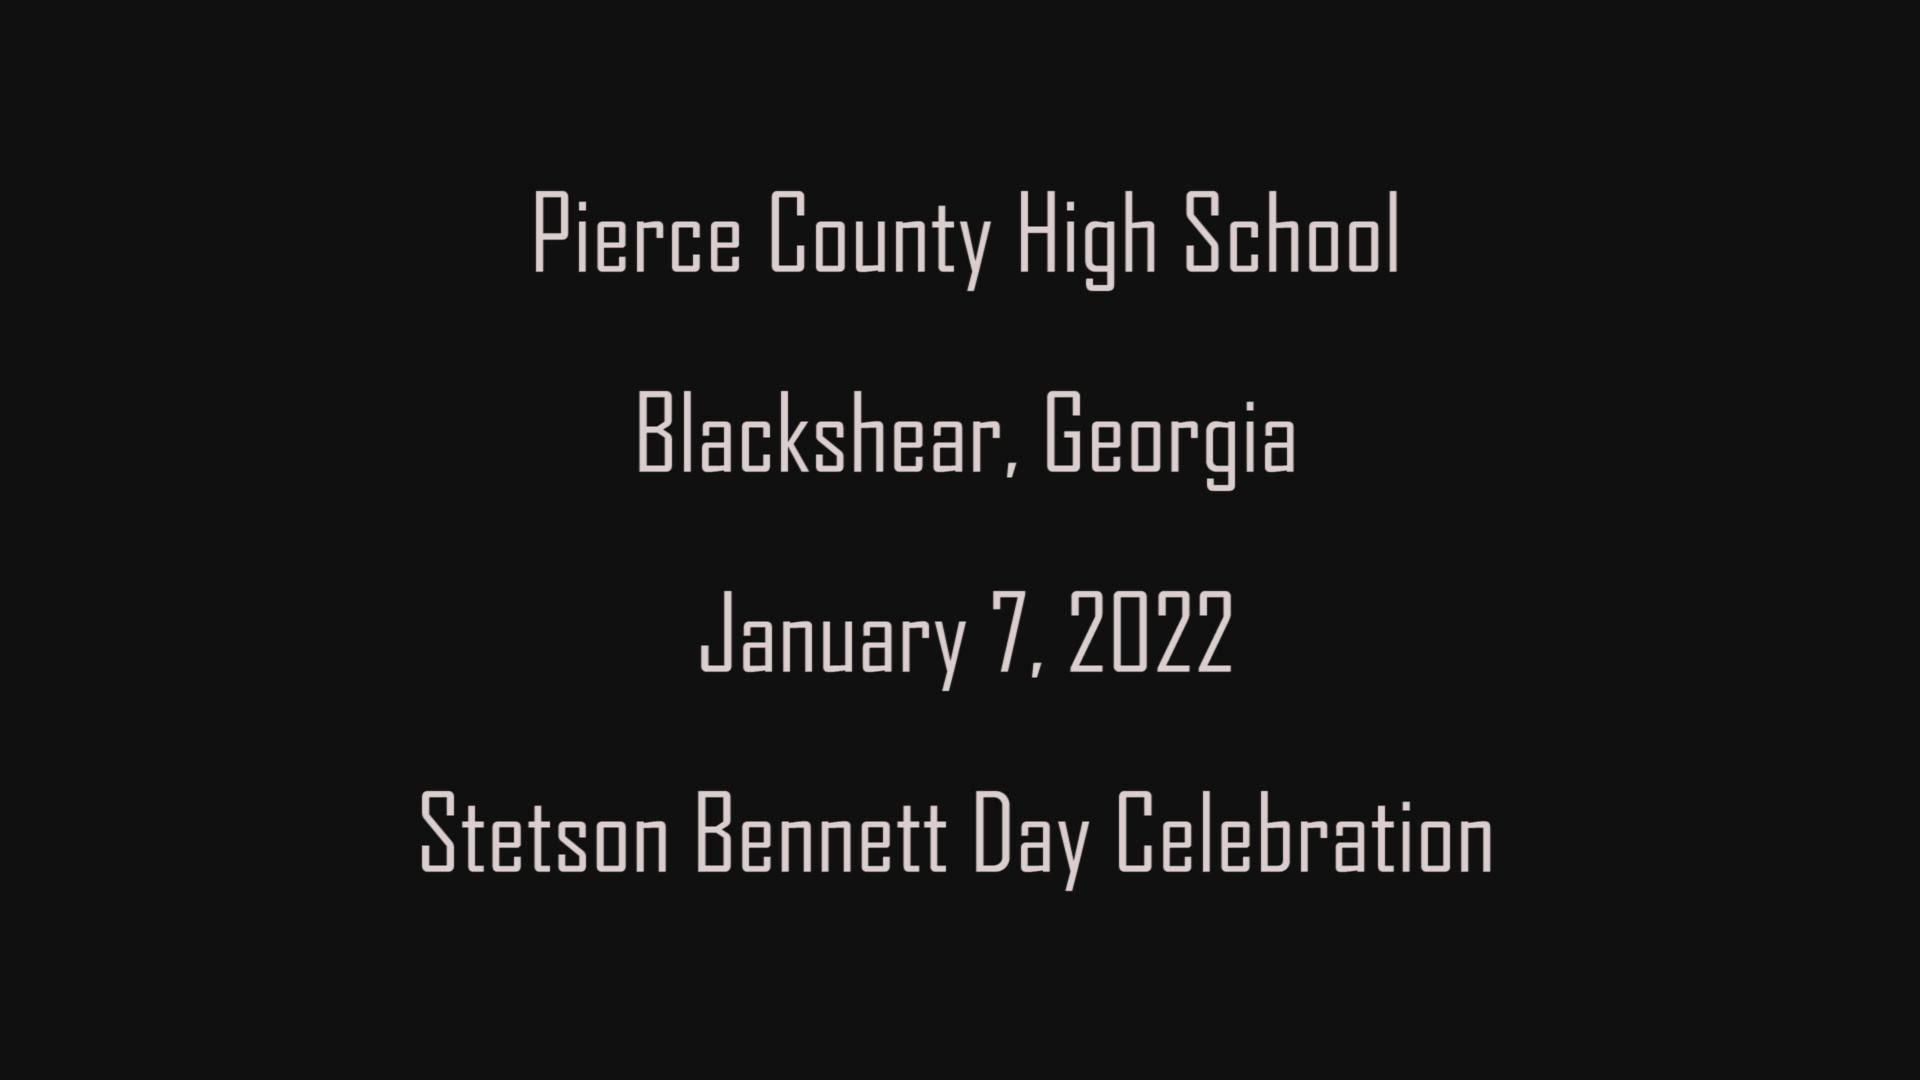 With Pierce County alum Stetson Bennett set to lead Georgia in the National Championship, Blackshear hosted a pep rally Friday. Monday will be "Stetson Bennett Day"